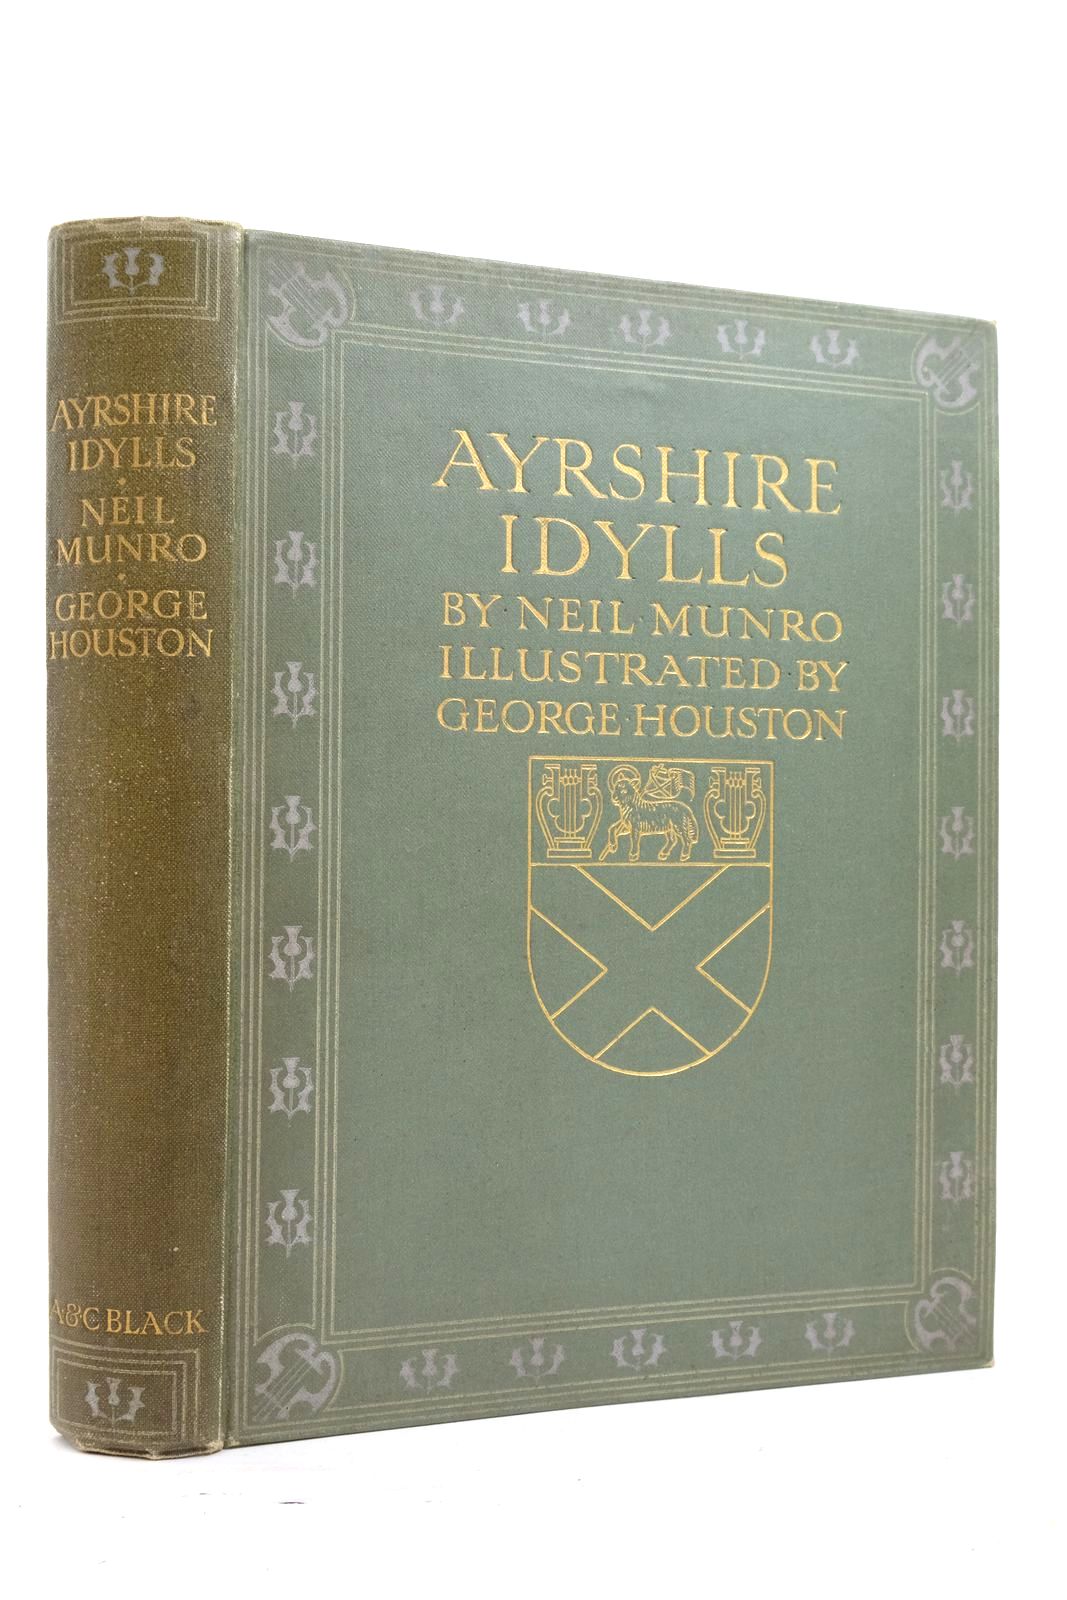 Photo of AYRSHIRE IDYLLS written by Munro, Neil illustrated by Houston, George published by A. & C. Black (STOCK CODE: 2137360)  for sale by Stella & Rose's Books